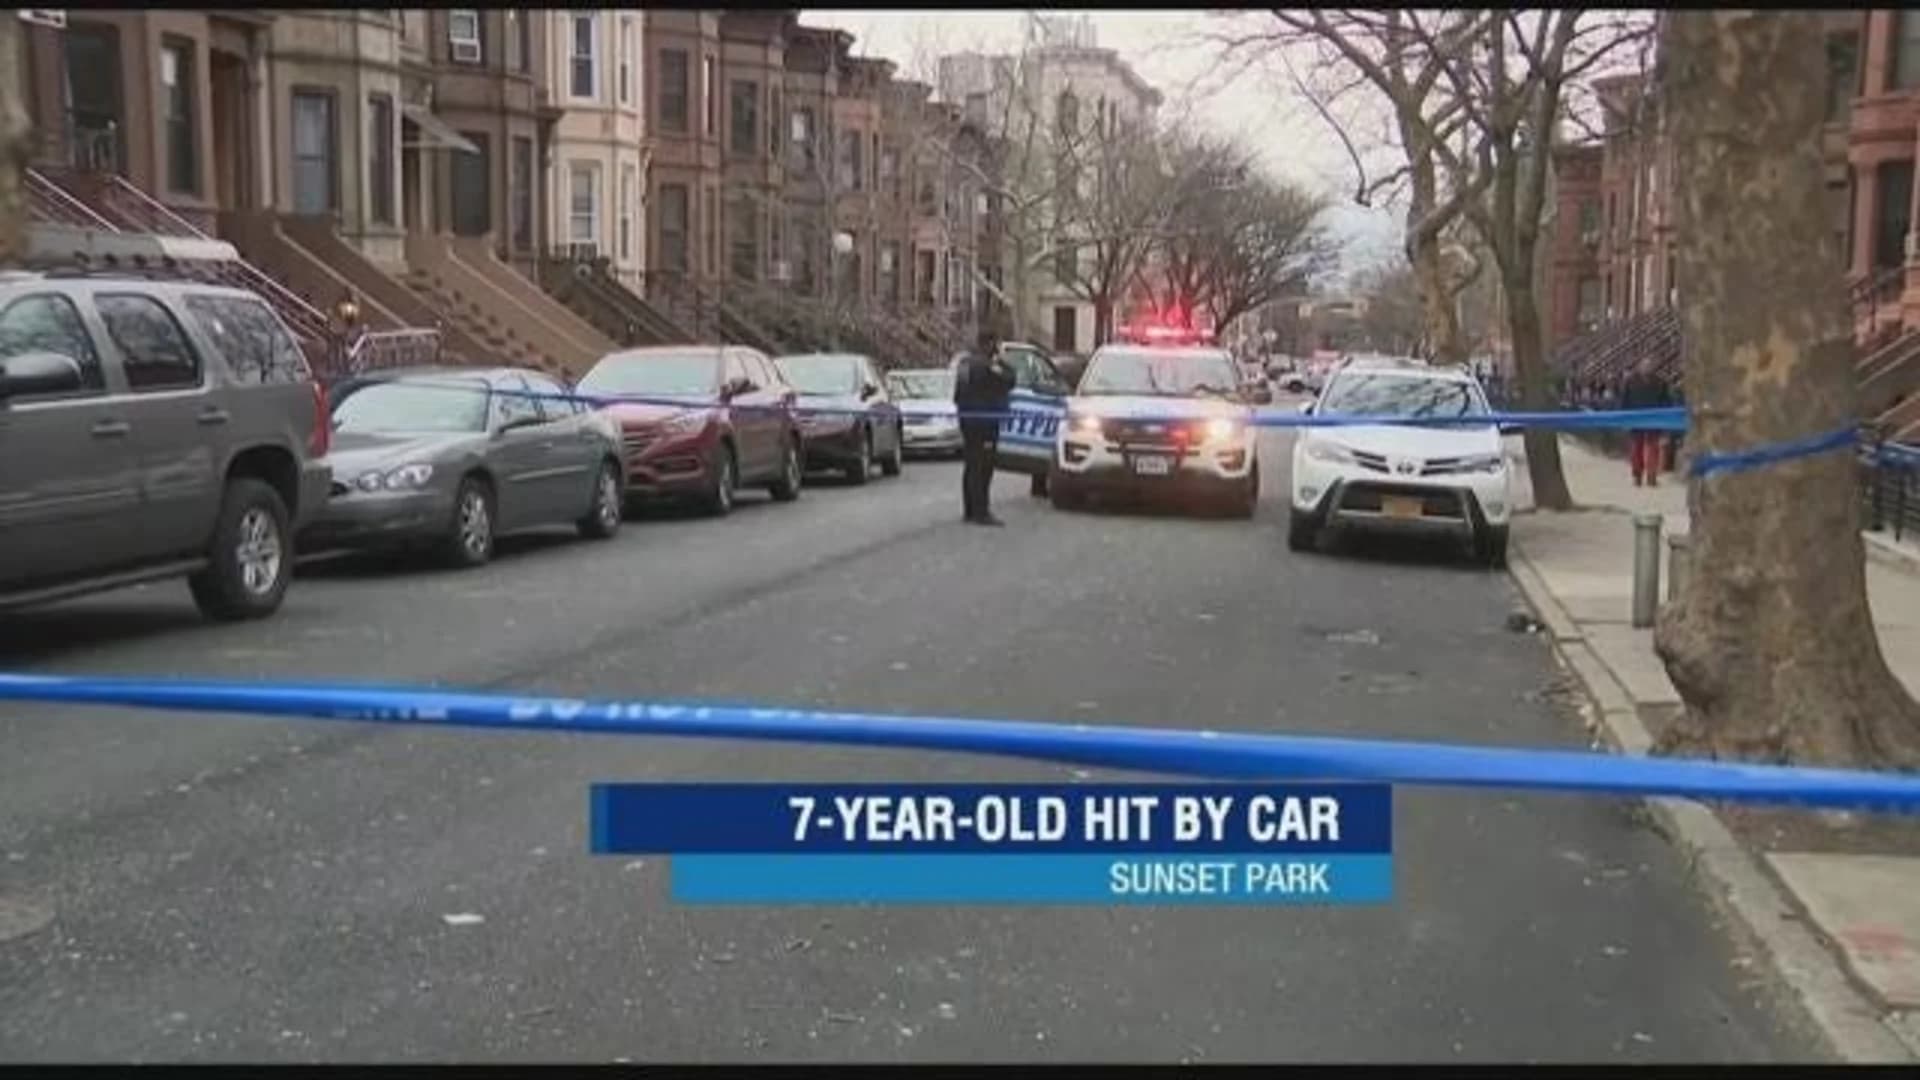 Police: 7-year-old struck by car in Sunset Park